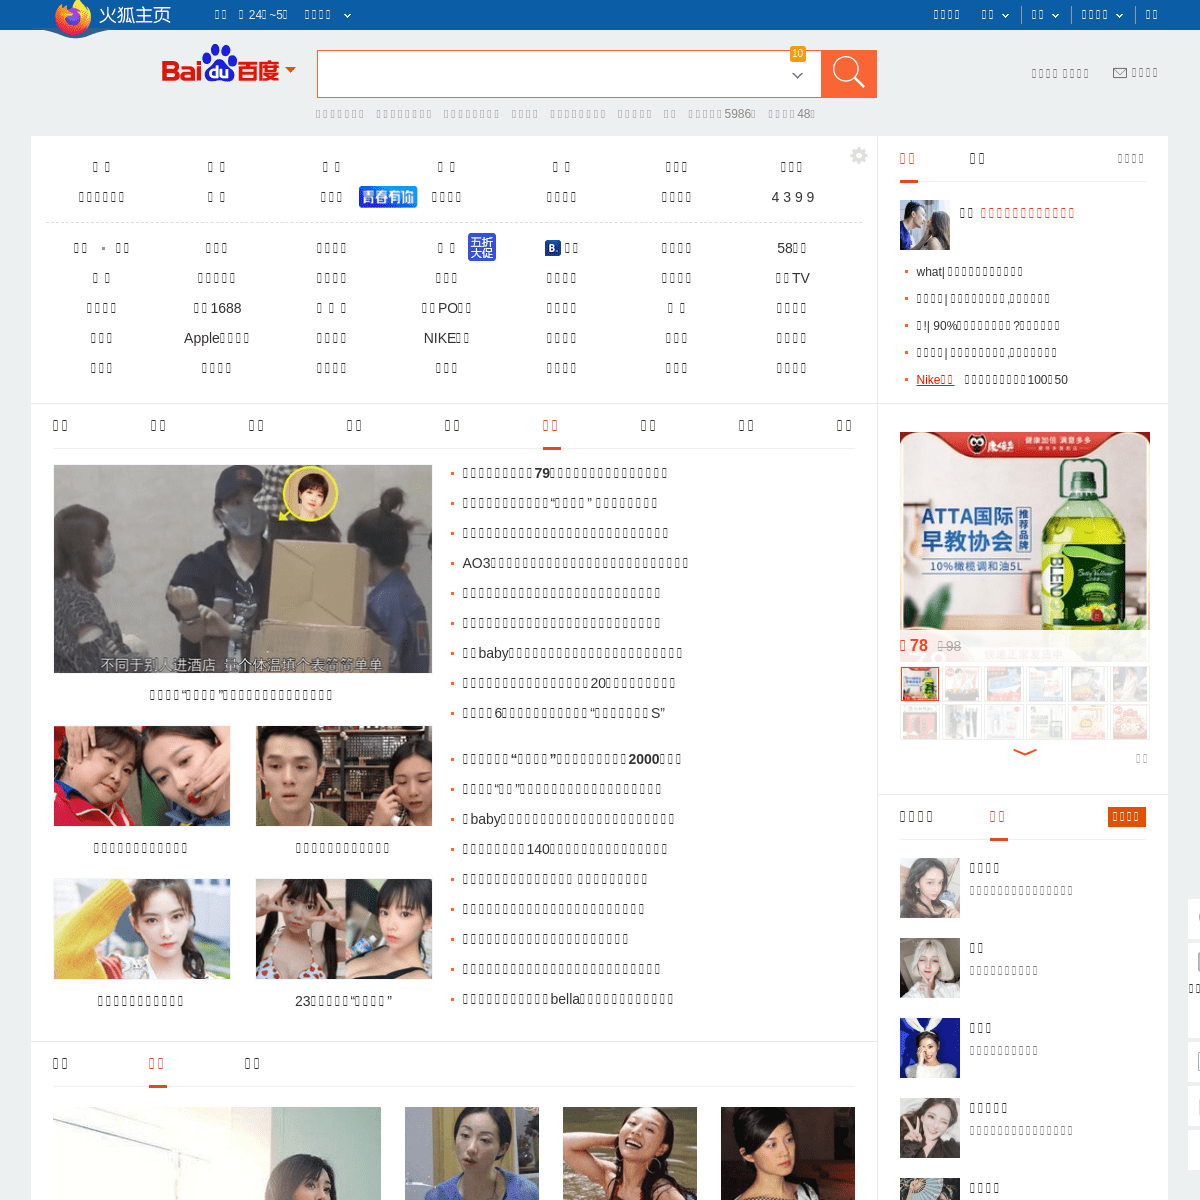 A complete backup of firefoxchina.cn